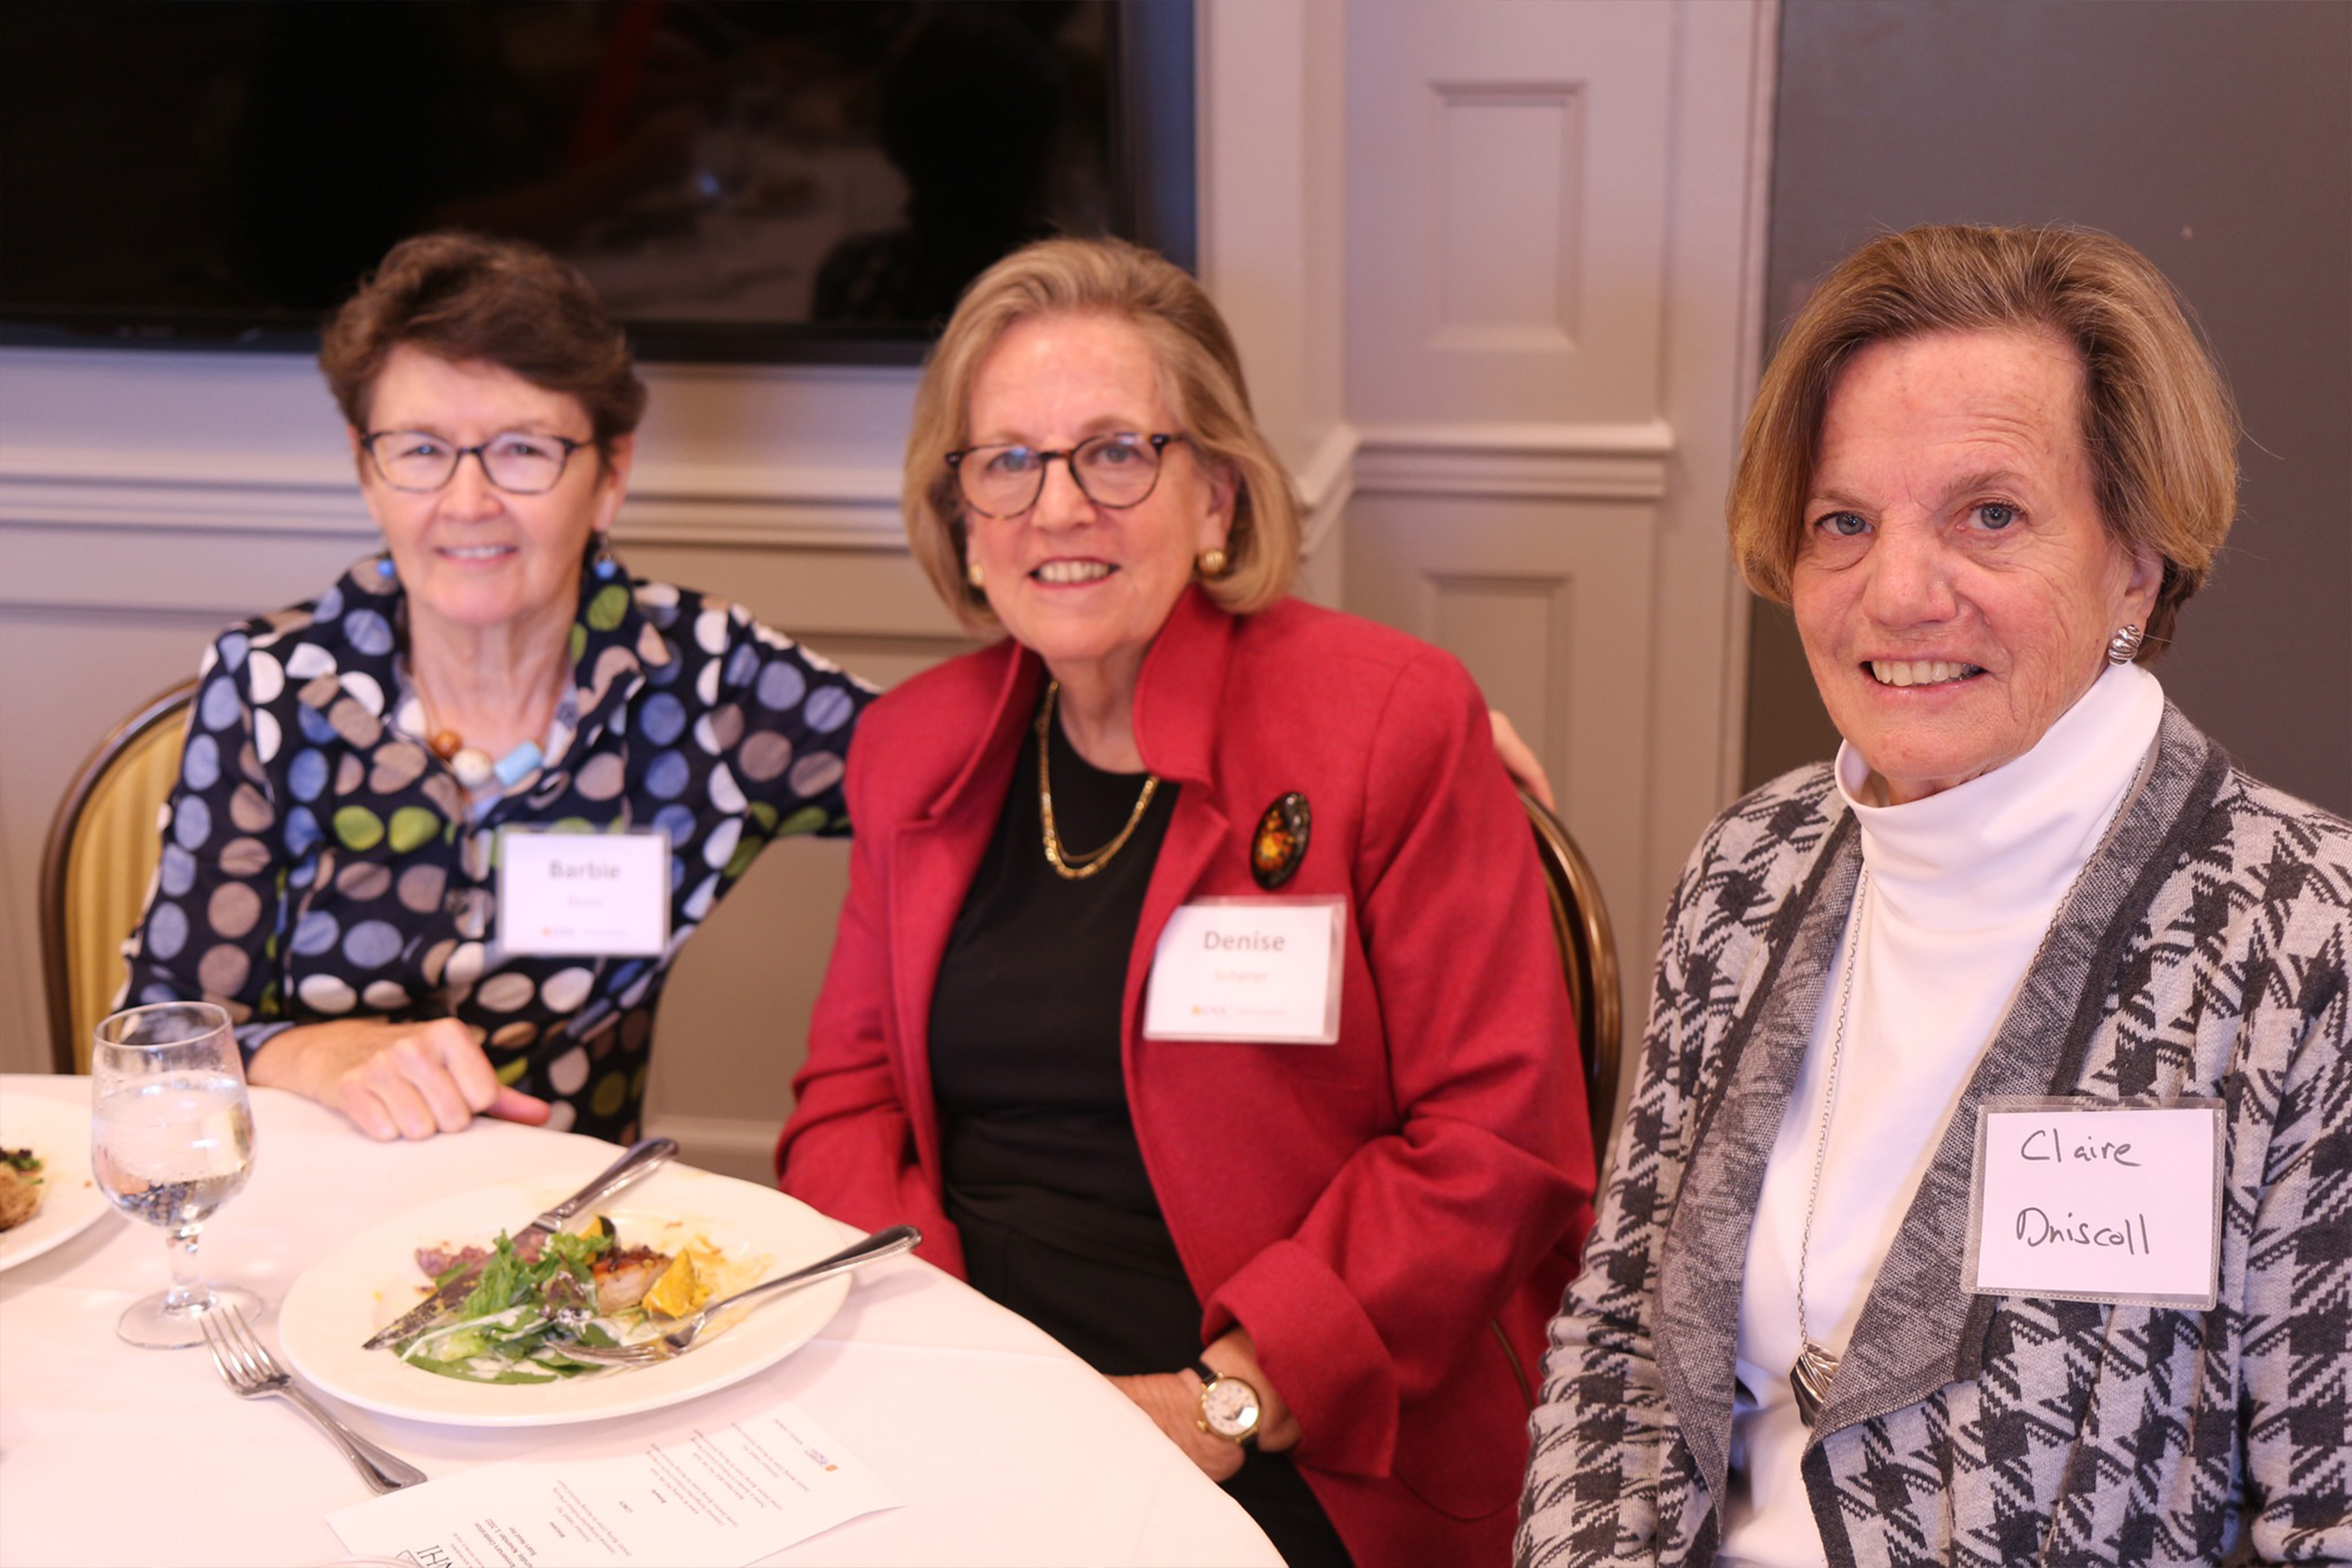 School of Nursing alumni gathered to celebrate the Bjoring Center's 30th year, including Barbie Dunn, Denise Sherer, and Claire Driscoll